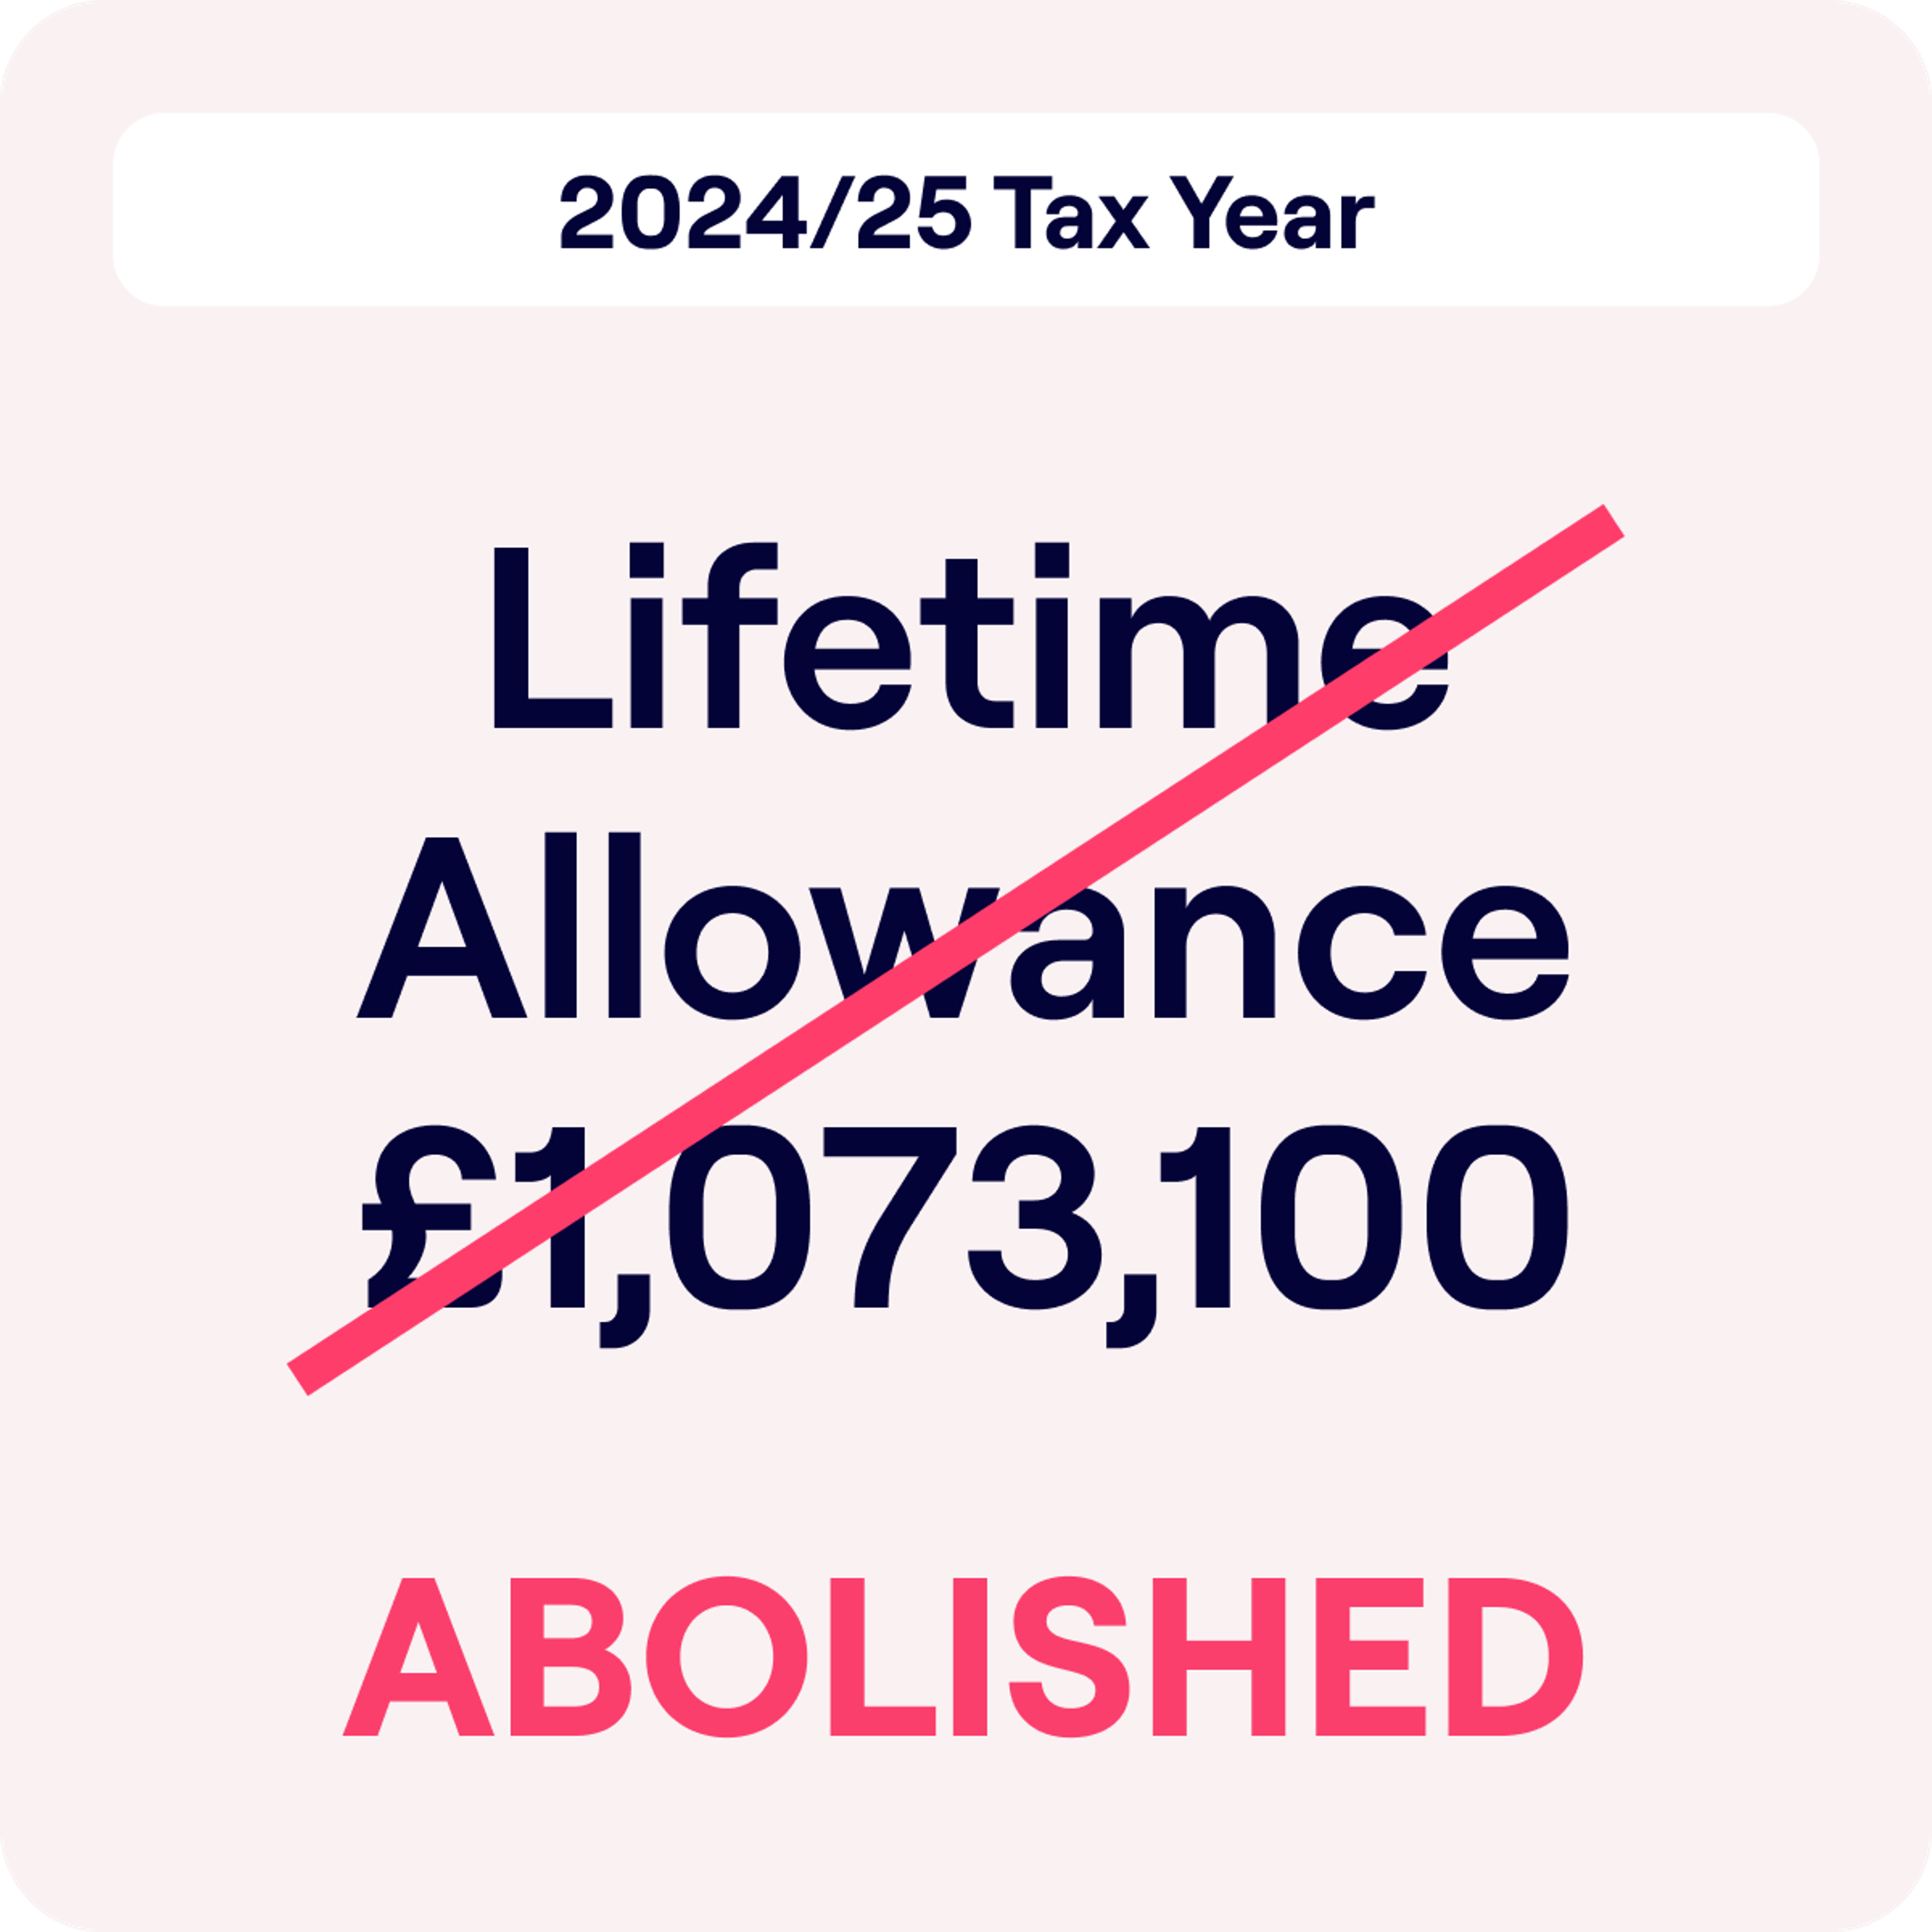 Graphic image indicating a policy change for the 2024/25 Tax Year. It shows the words 'Lifetime Allowance £1,073,100' crossed out in red with a large, bold caption below reading 'ABOLISHED'